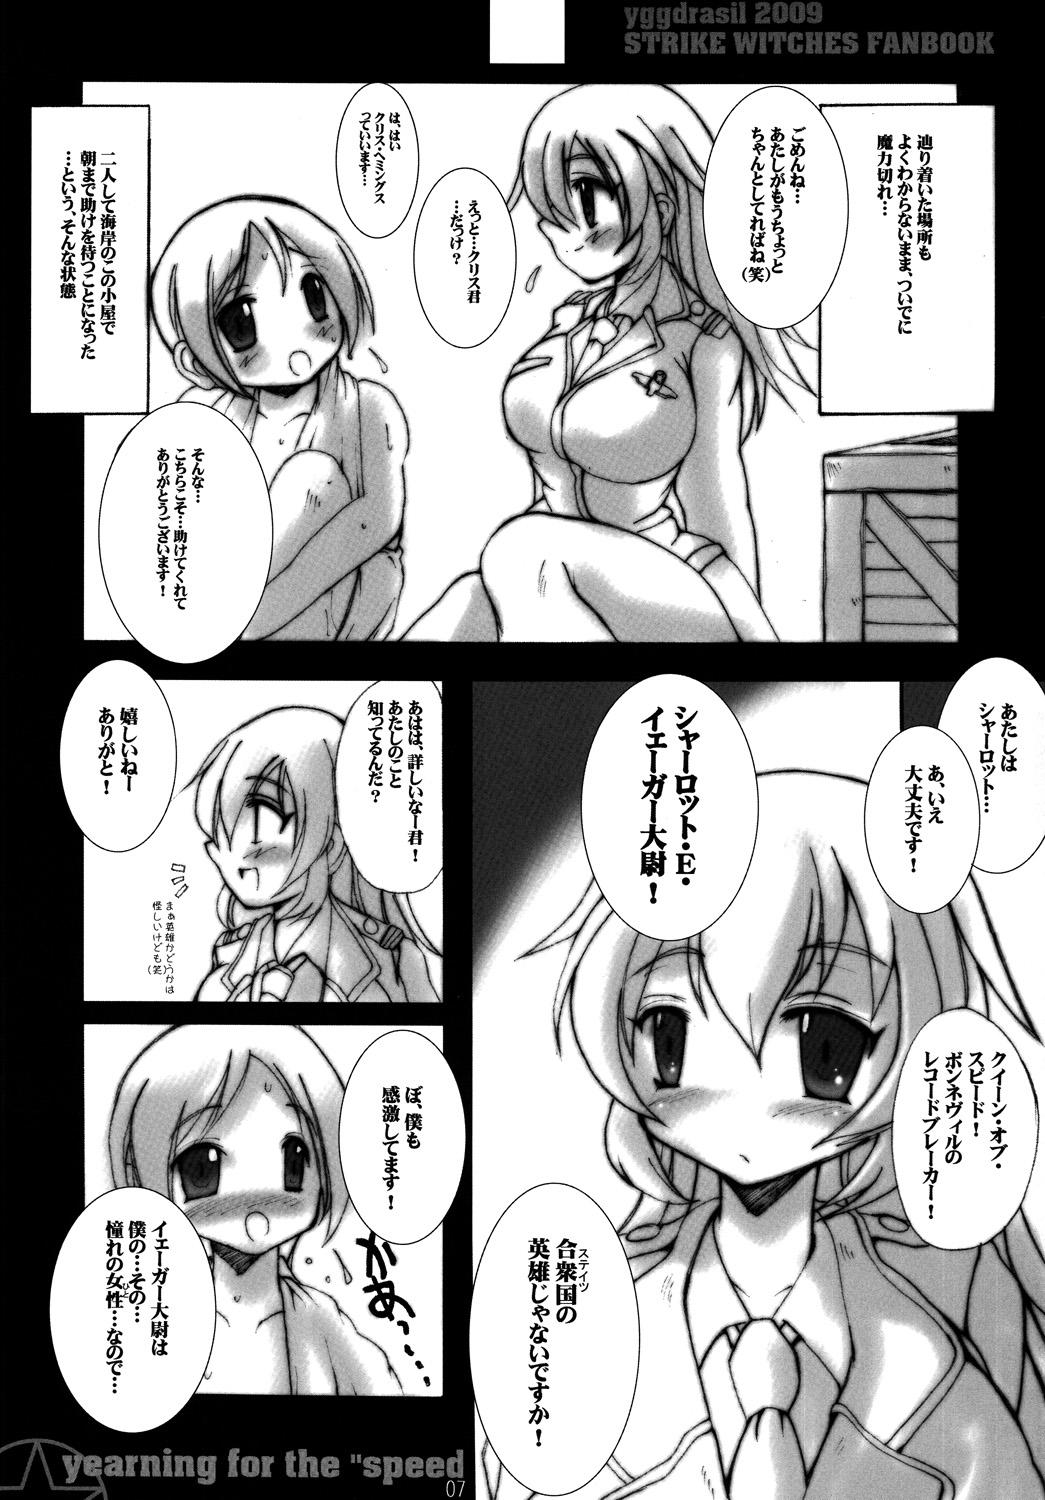 Female yearning for the “speed” - Strike witches Old And Young - Page 6